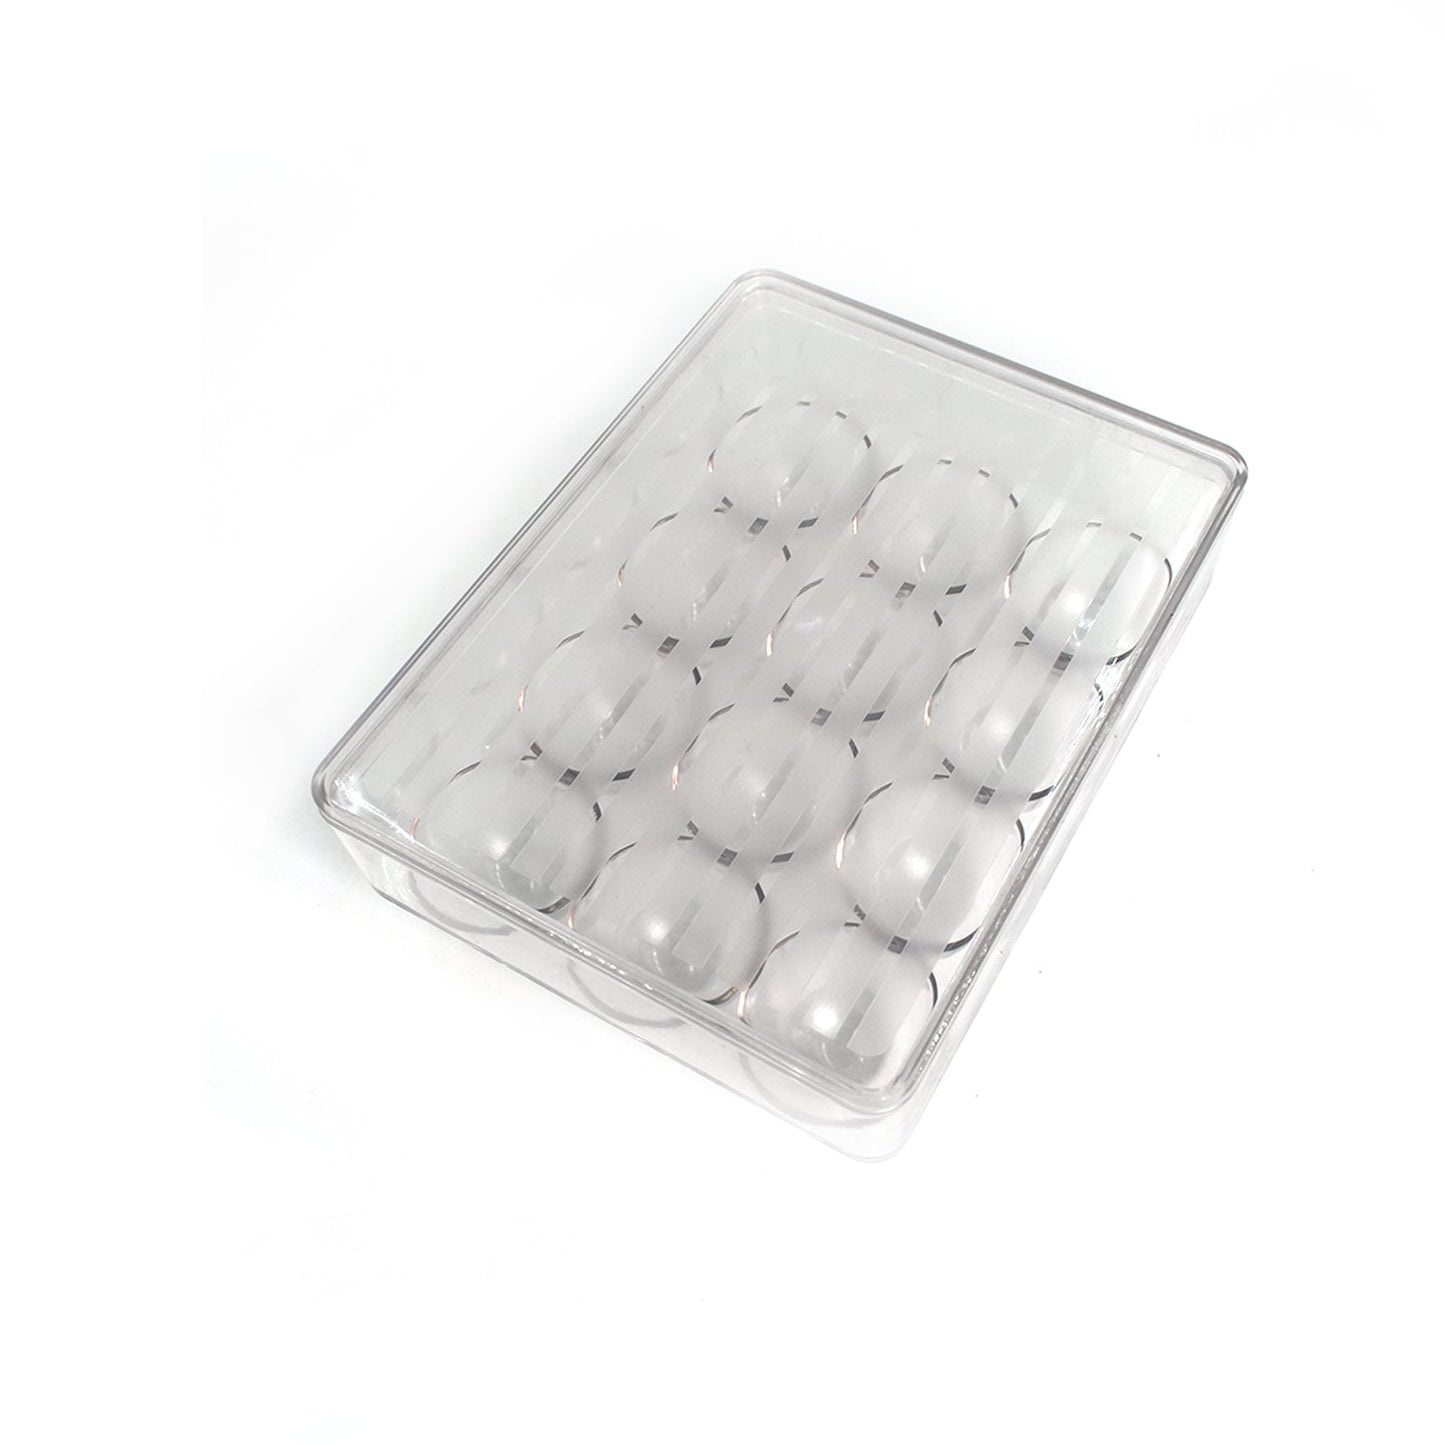 2794B 12 Cavity Egg Storage Box For Holding And Placing Eggs Easily And Firmly.